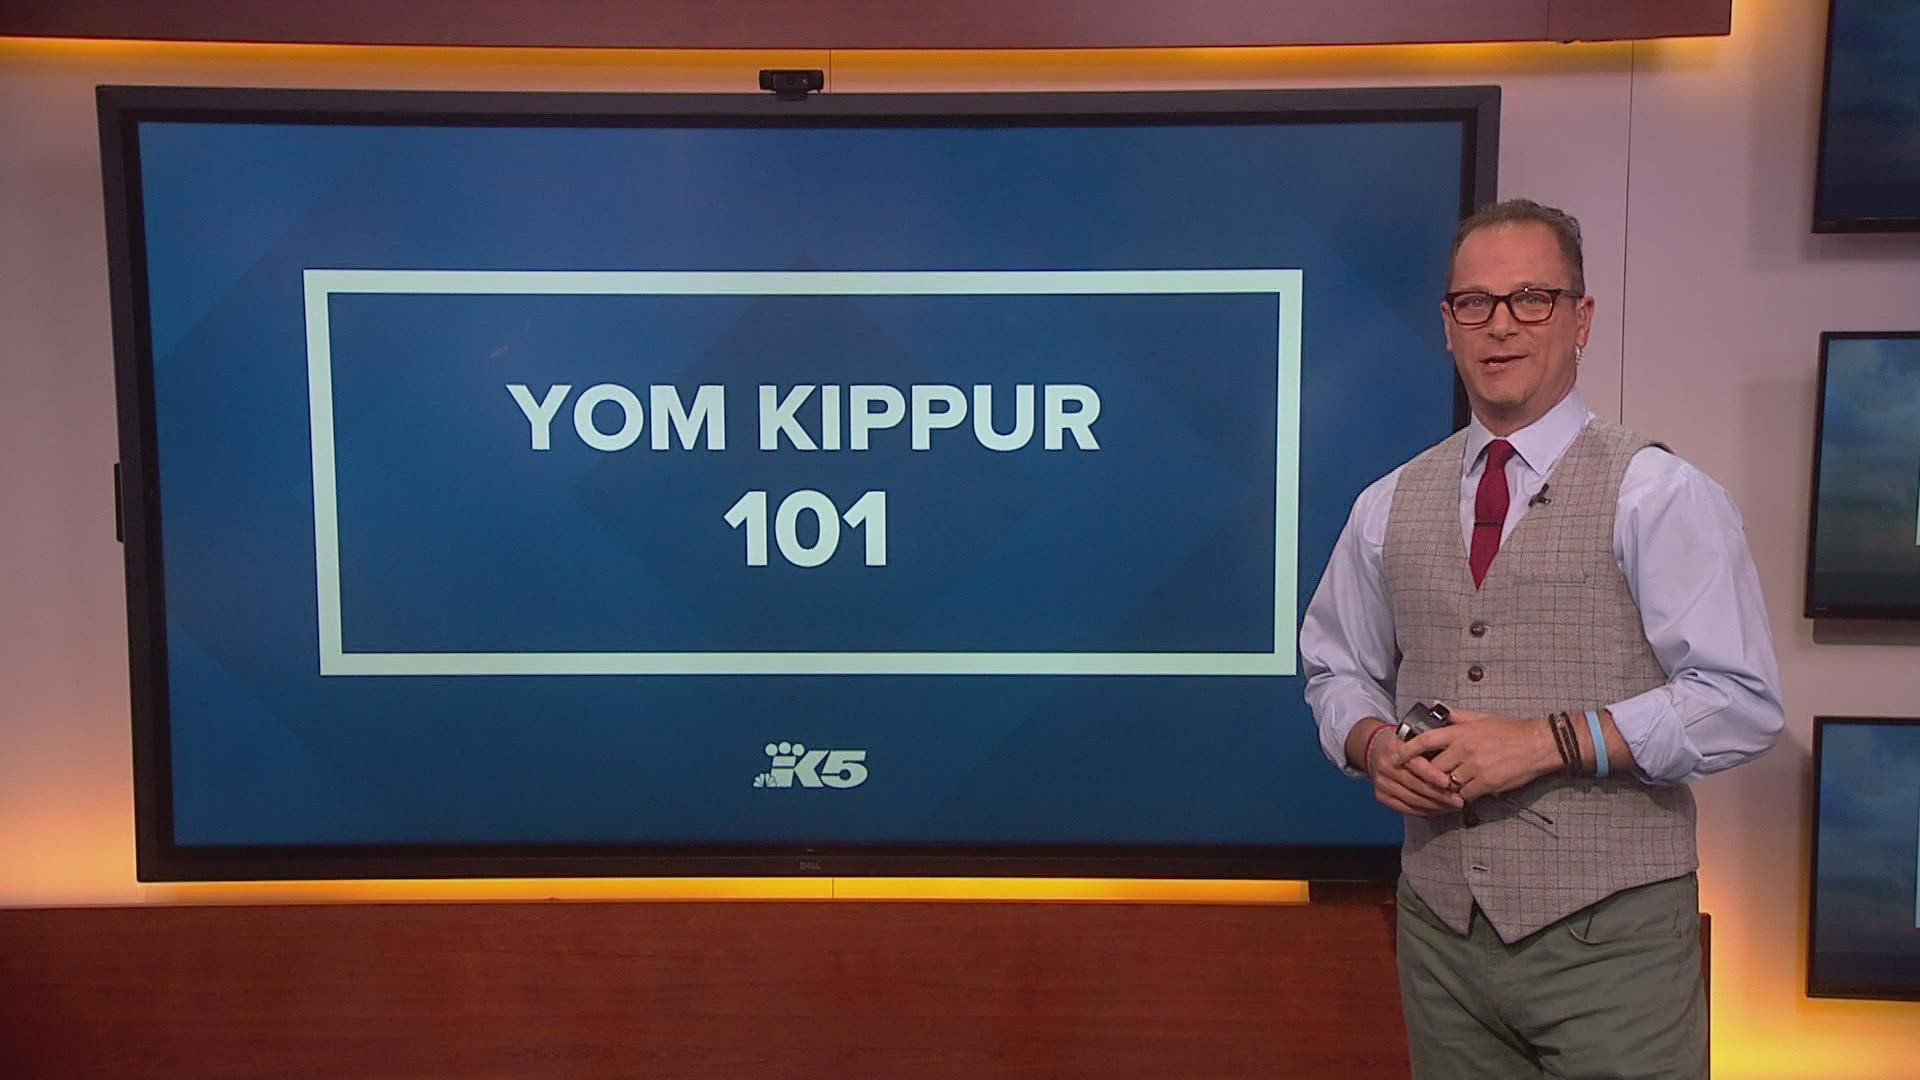 Steve Bunin explains that Yom Kippur is the holiest day of the year for Jews.